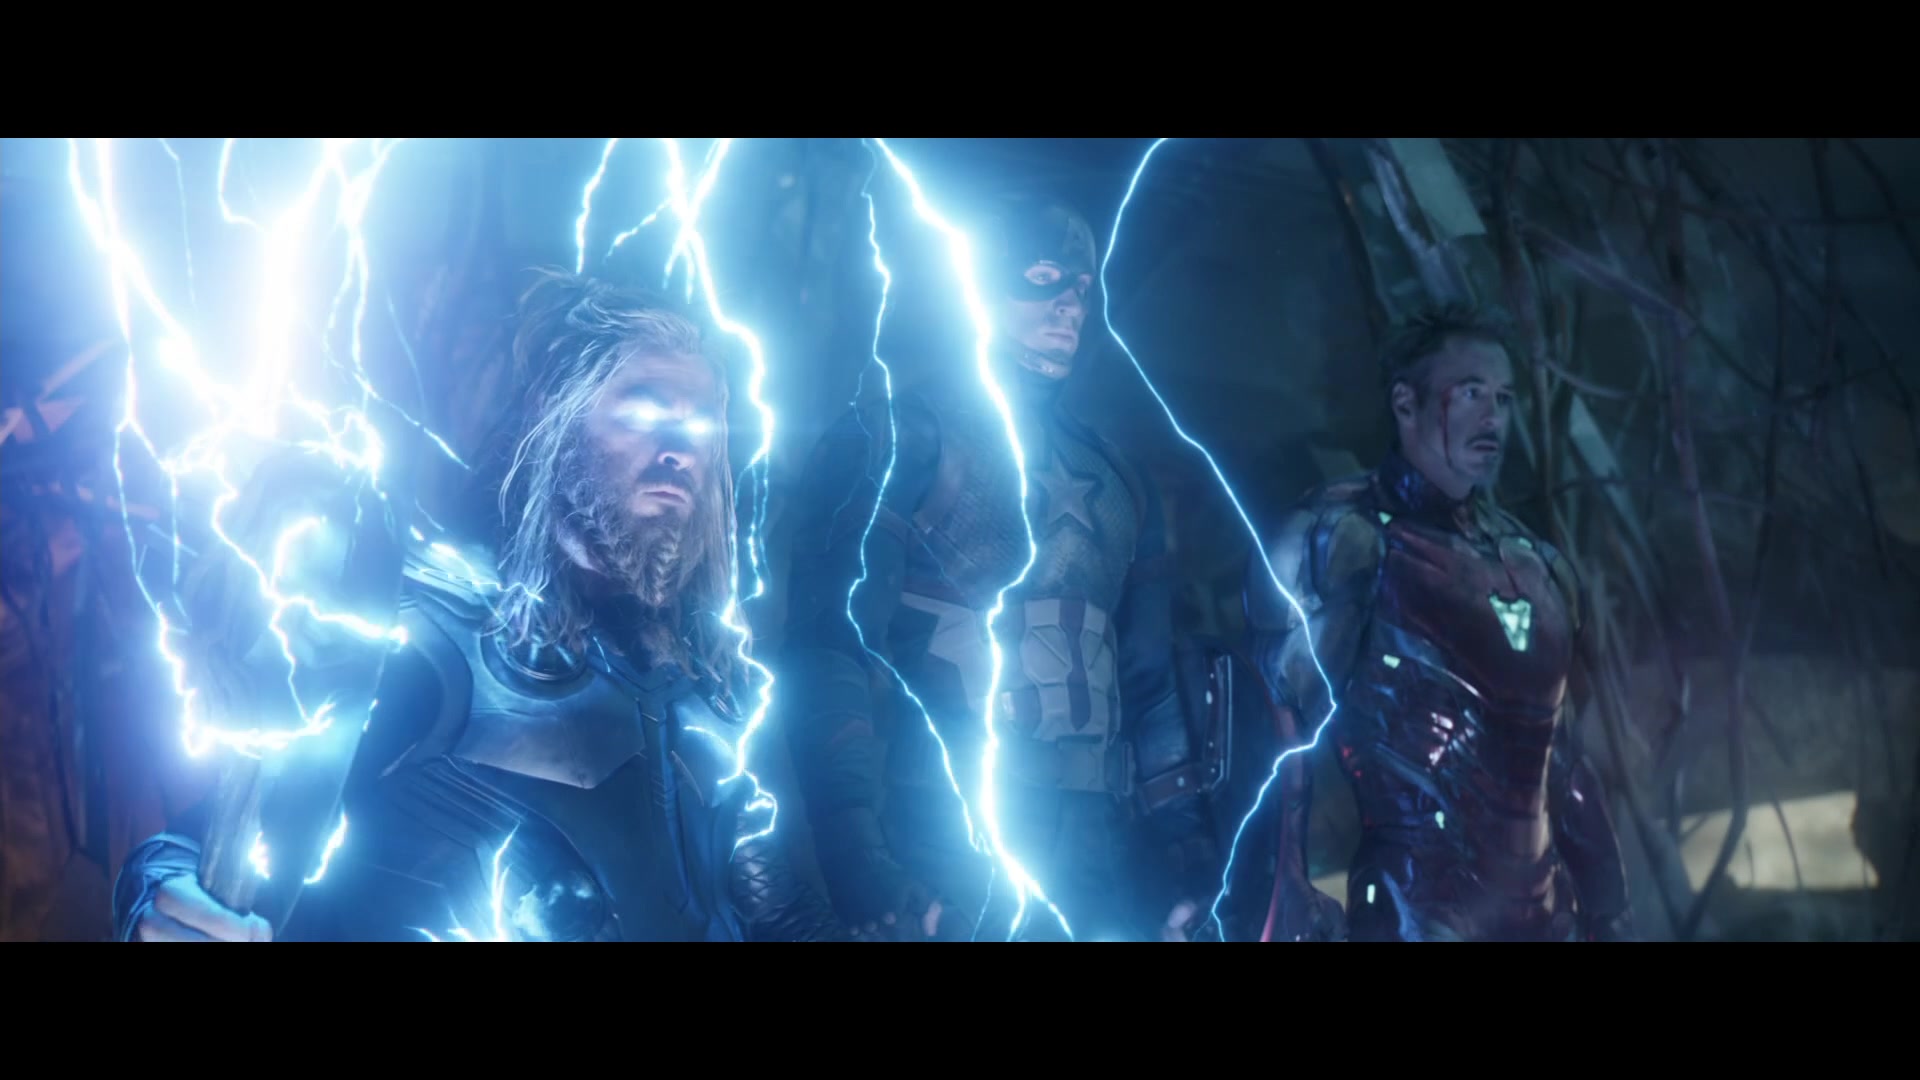 Thor (Chris Hemsworth), Captain America (Chris Evans) and Iron Man (Robert Downey. Jr) stand together one final time in Avengers: Endgame (2019), Marvel Entertainment